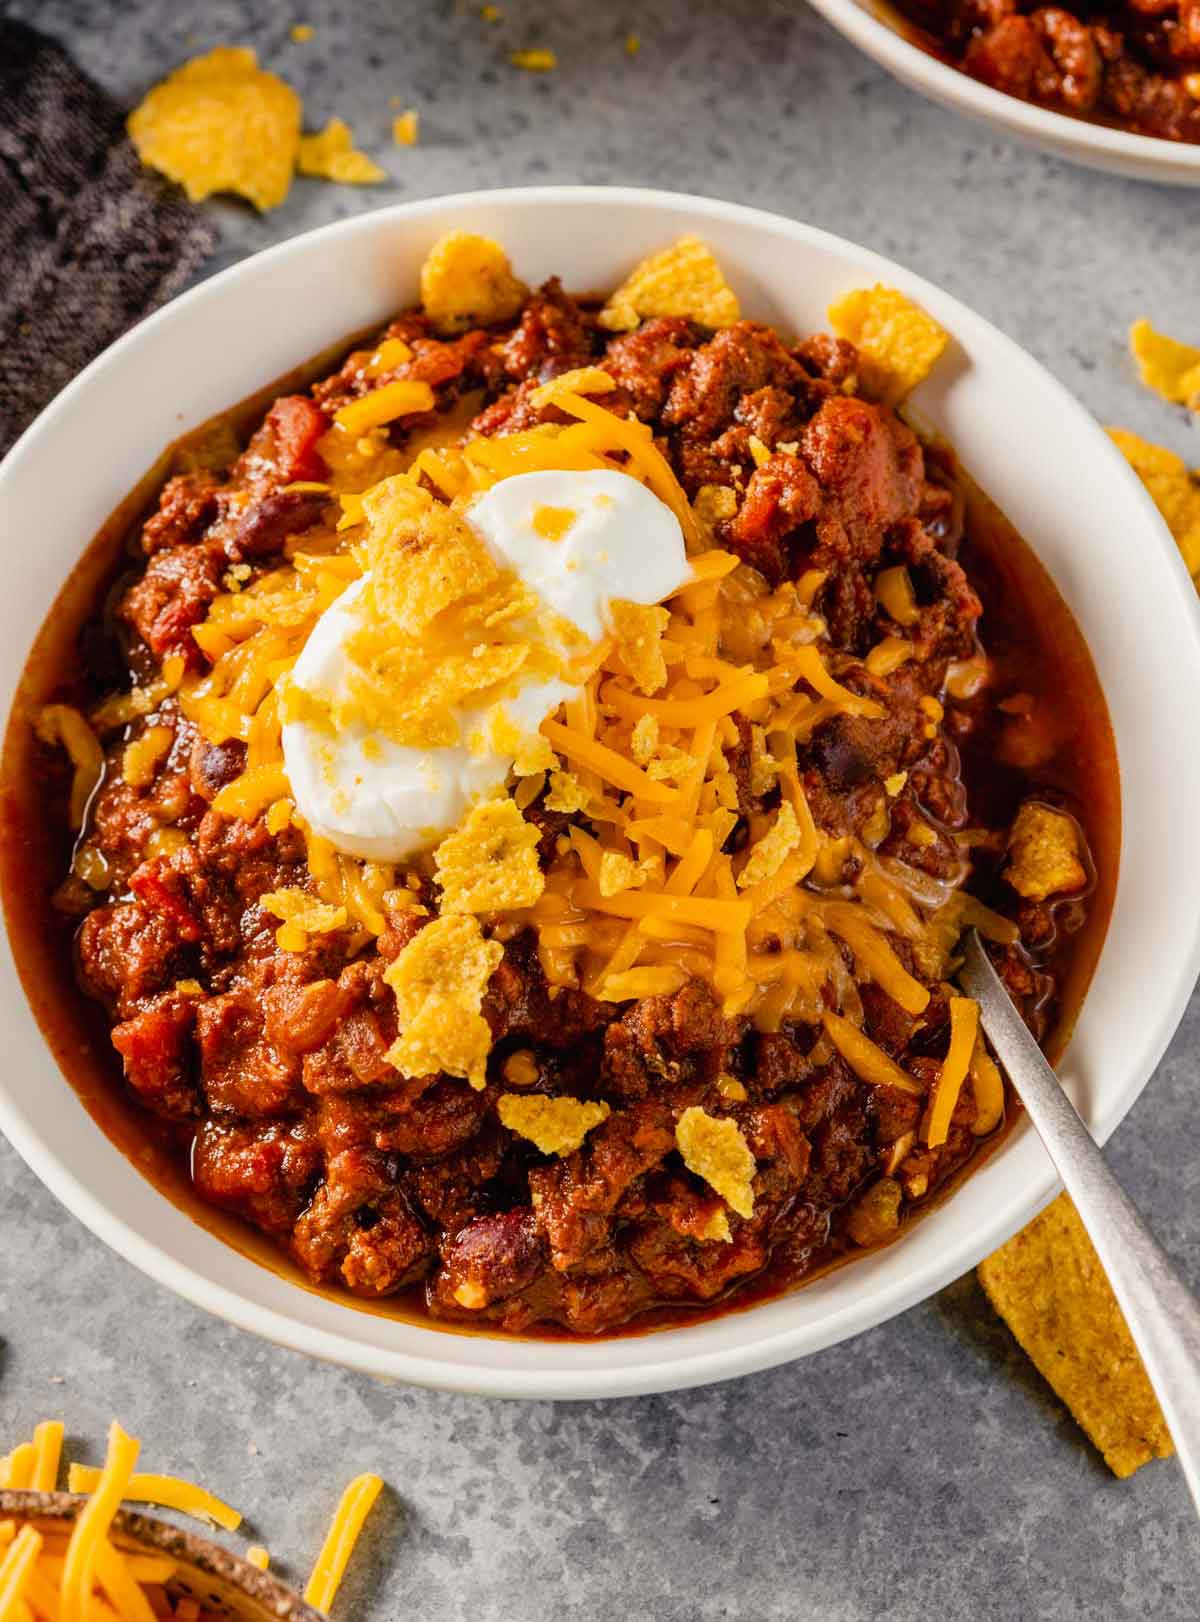 Beef chili in a white bowl on a gray counter with shredded cheese, sour cream, and corn chips on top.